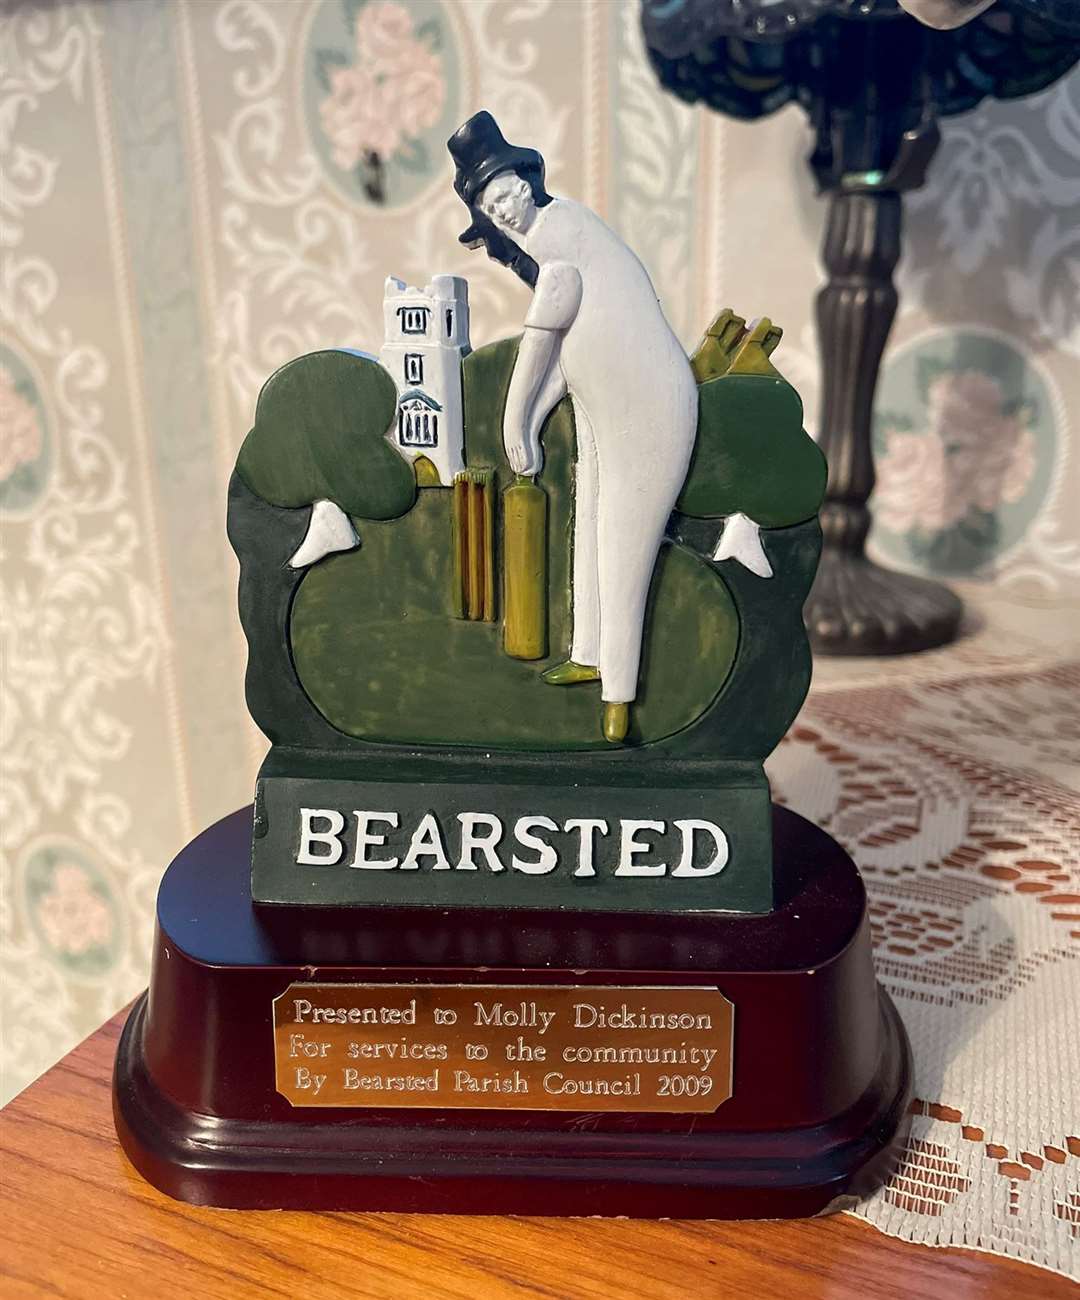 The trophy given to Molly by Bearsted Parish Council